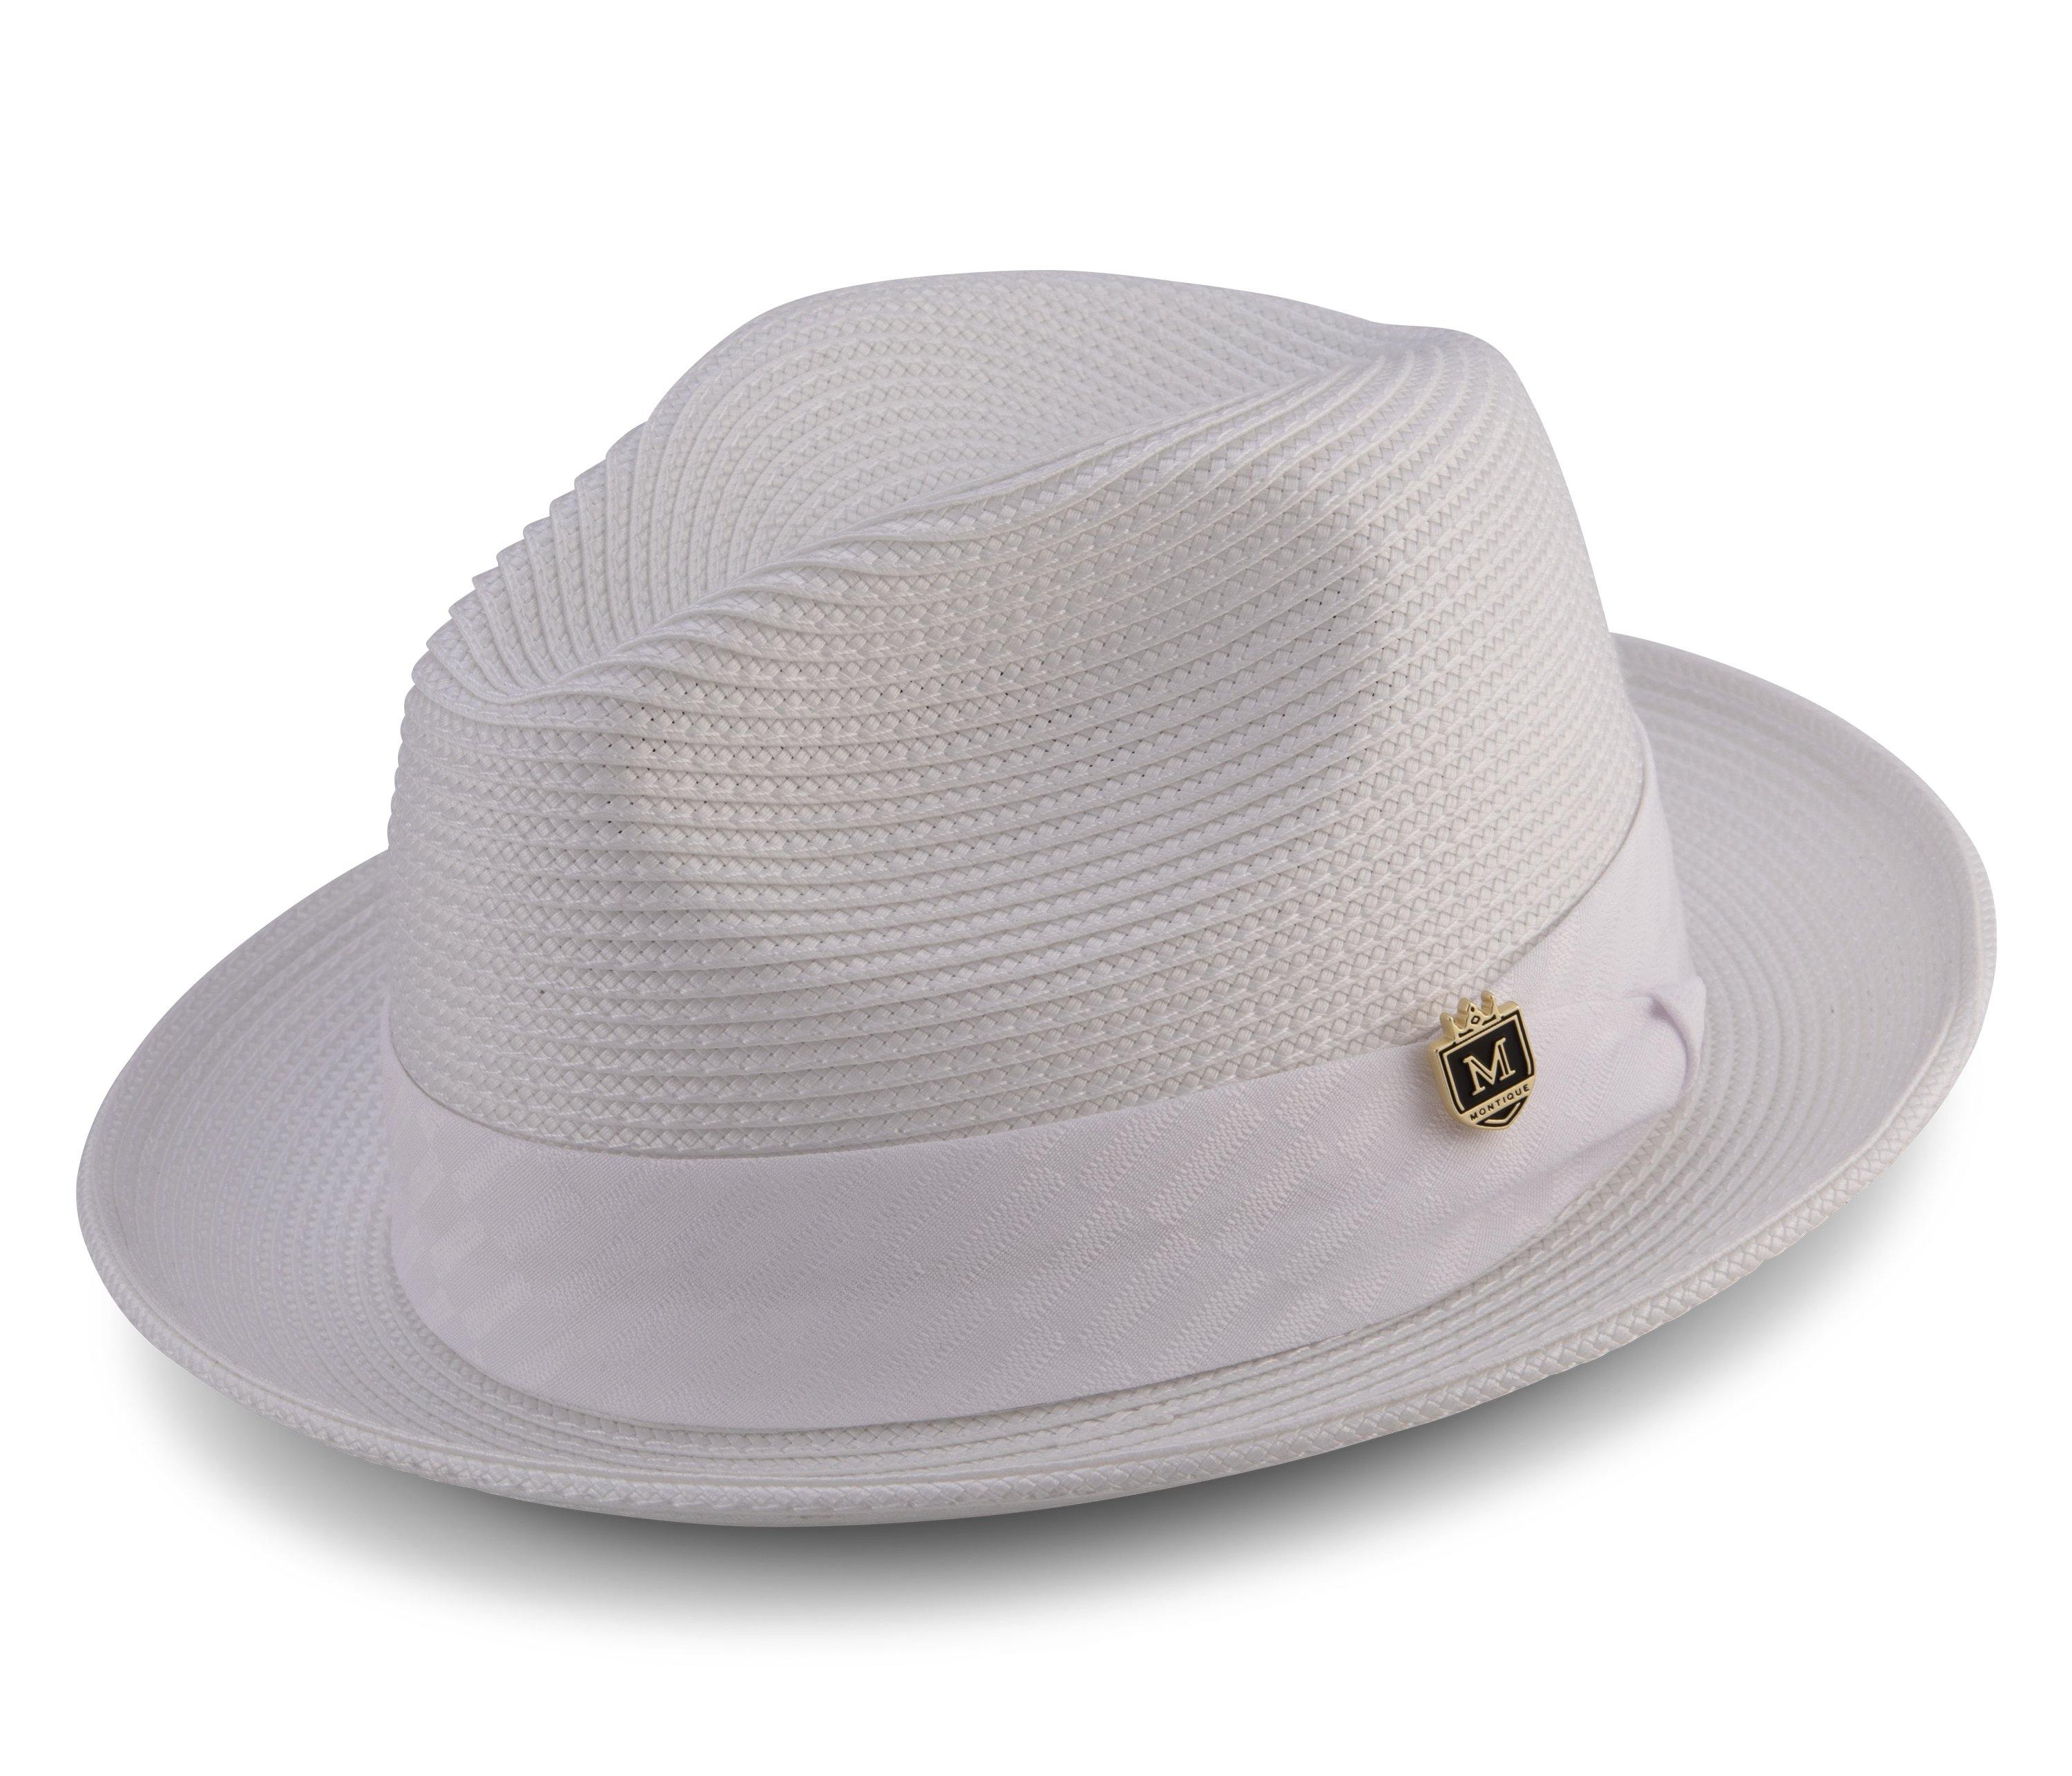 Men's Braided Two Tone Snap Brim Pinch Fedora Hat in White H-2054 - Suits & More